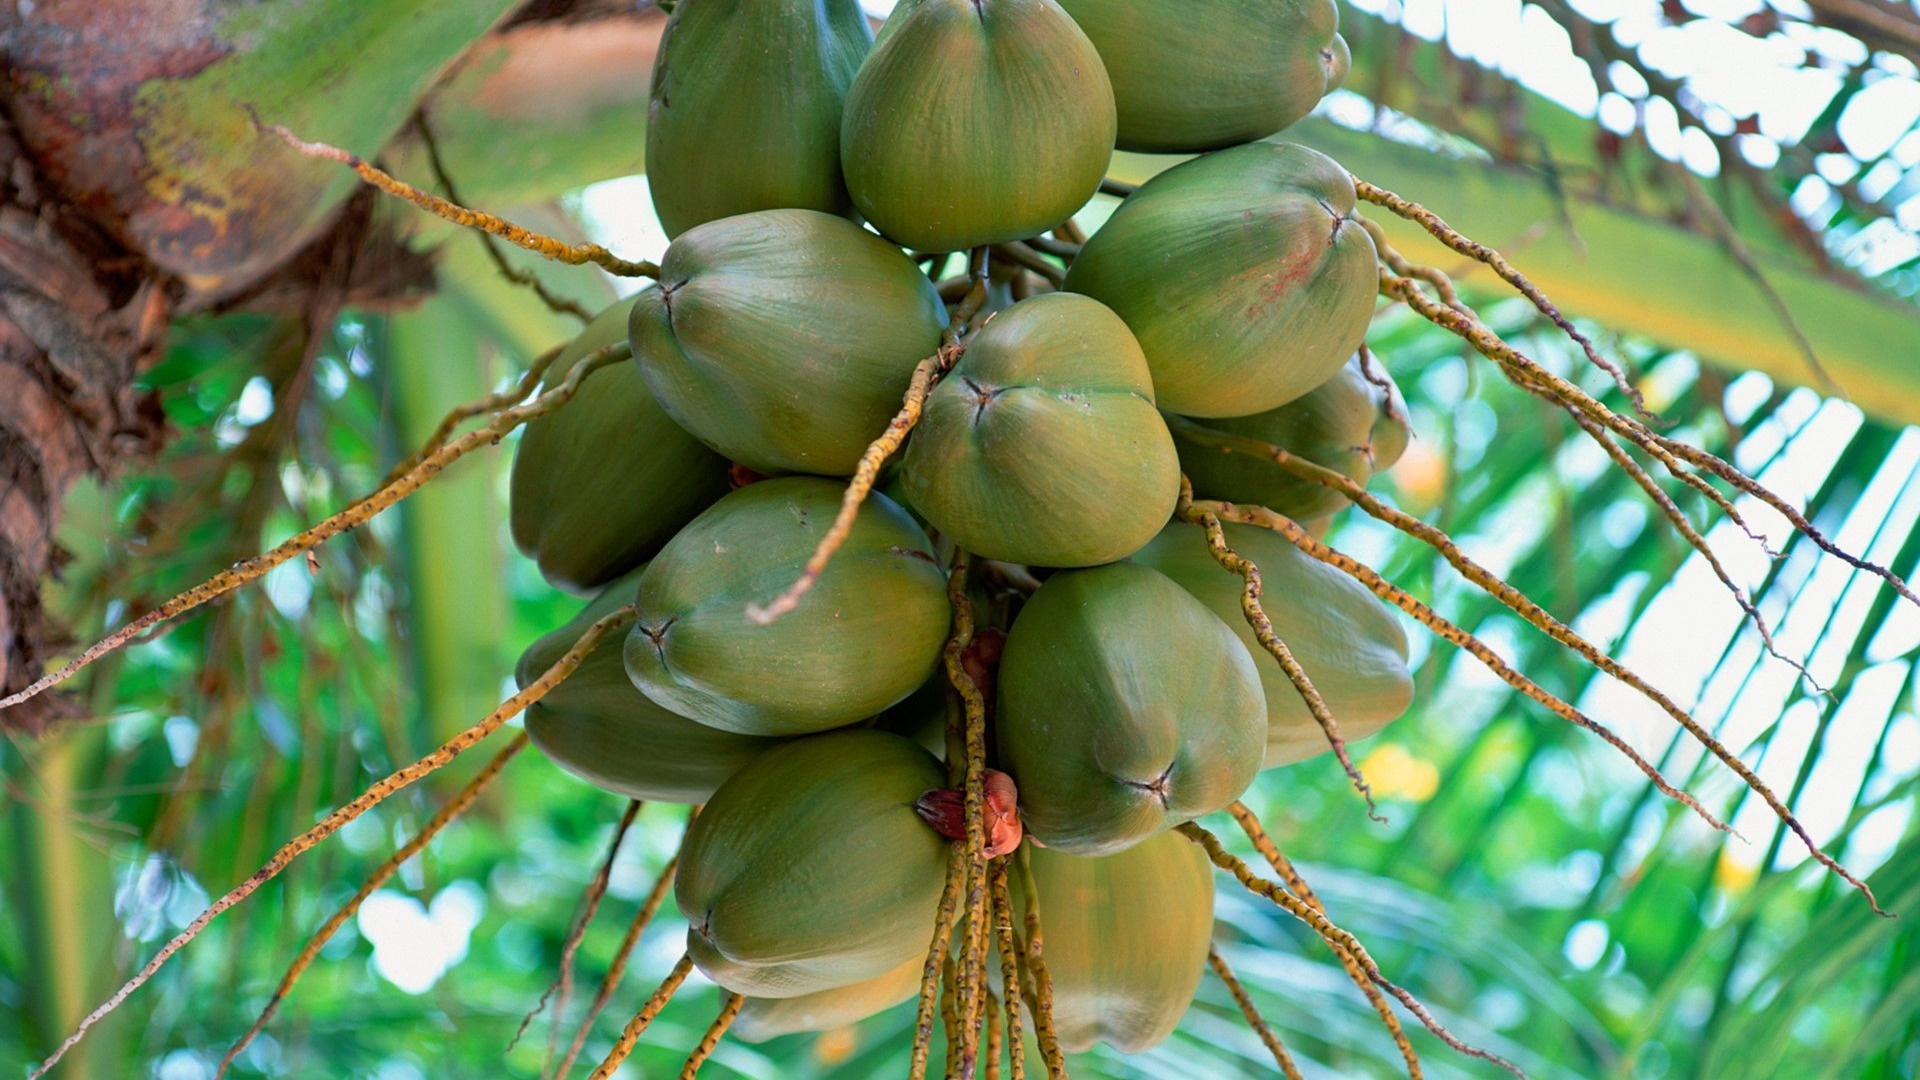 Coconut: Cocos nucifera, A large palm, growing up to 30 meters tall. 1920x1080 Full HD Wallpaper.